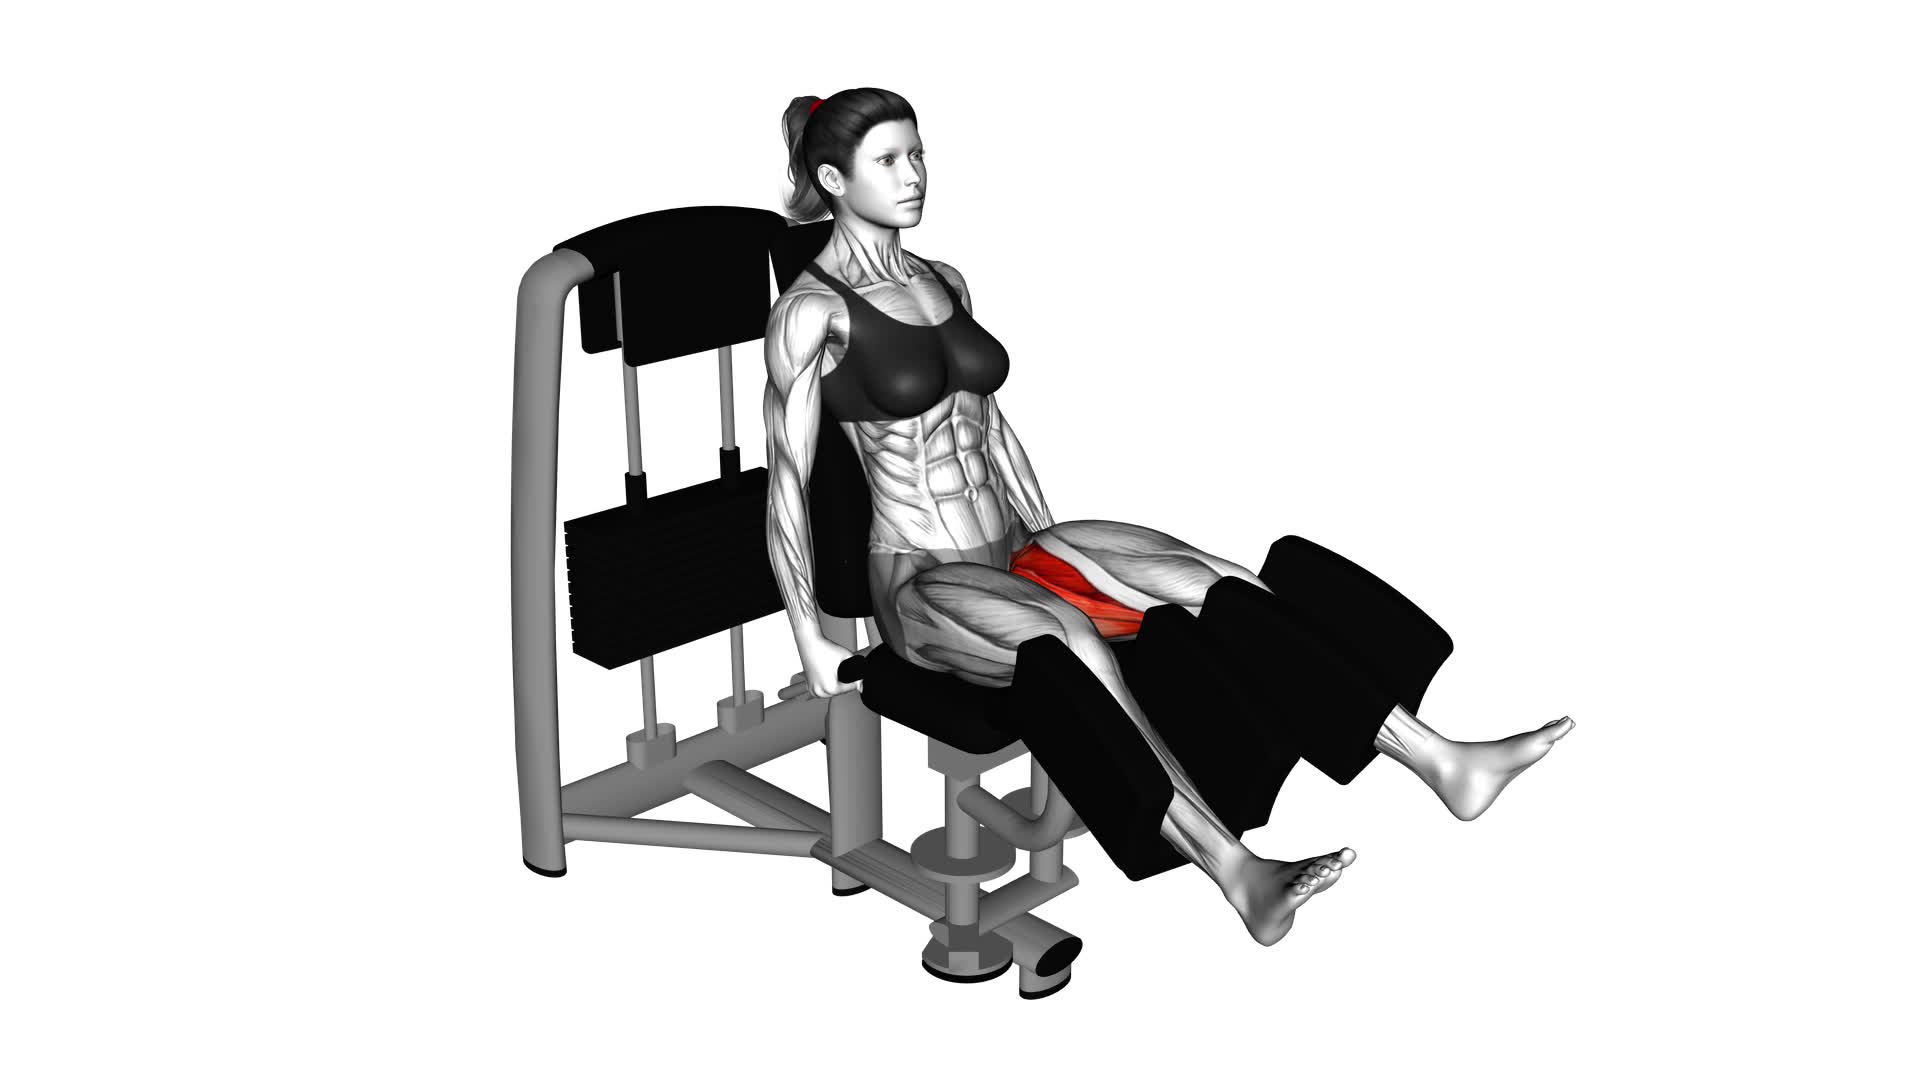 Lever Seated Hip Adduction (VERSION 2) (female) - Video Exercise Guide & Tips